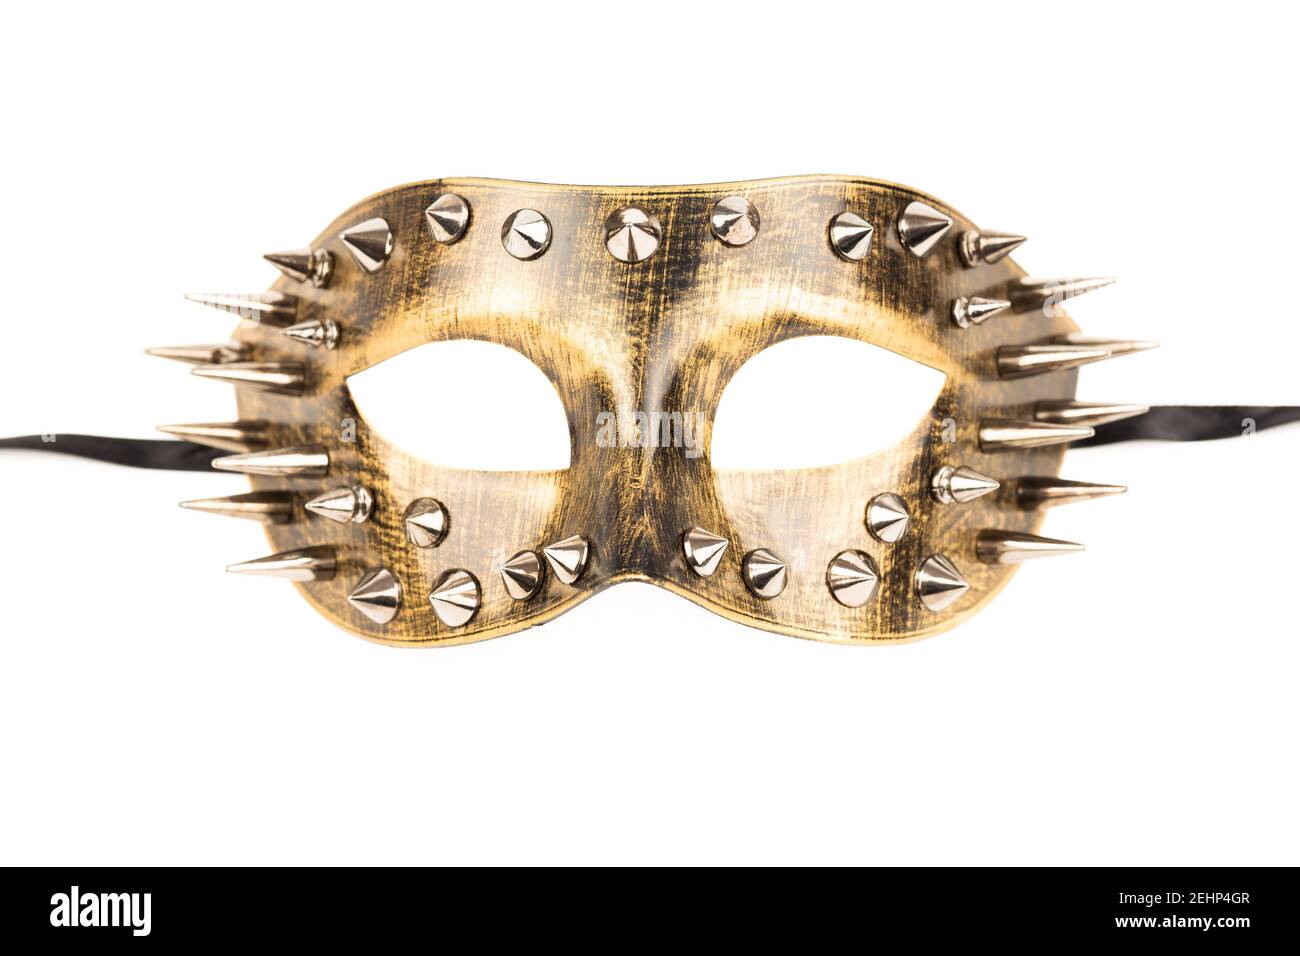 Carnival mask with spikes isolated on a white background. Stock Photo